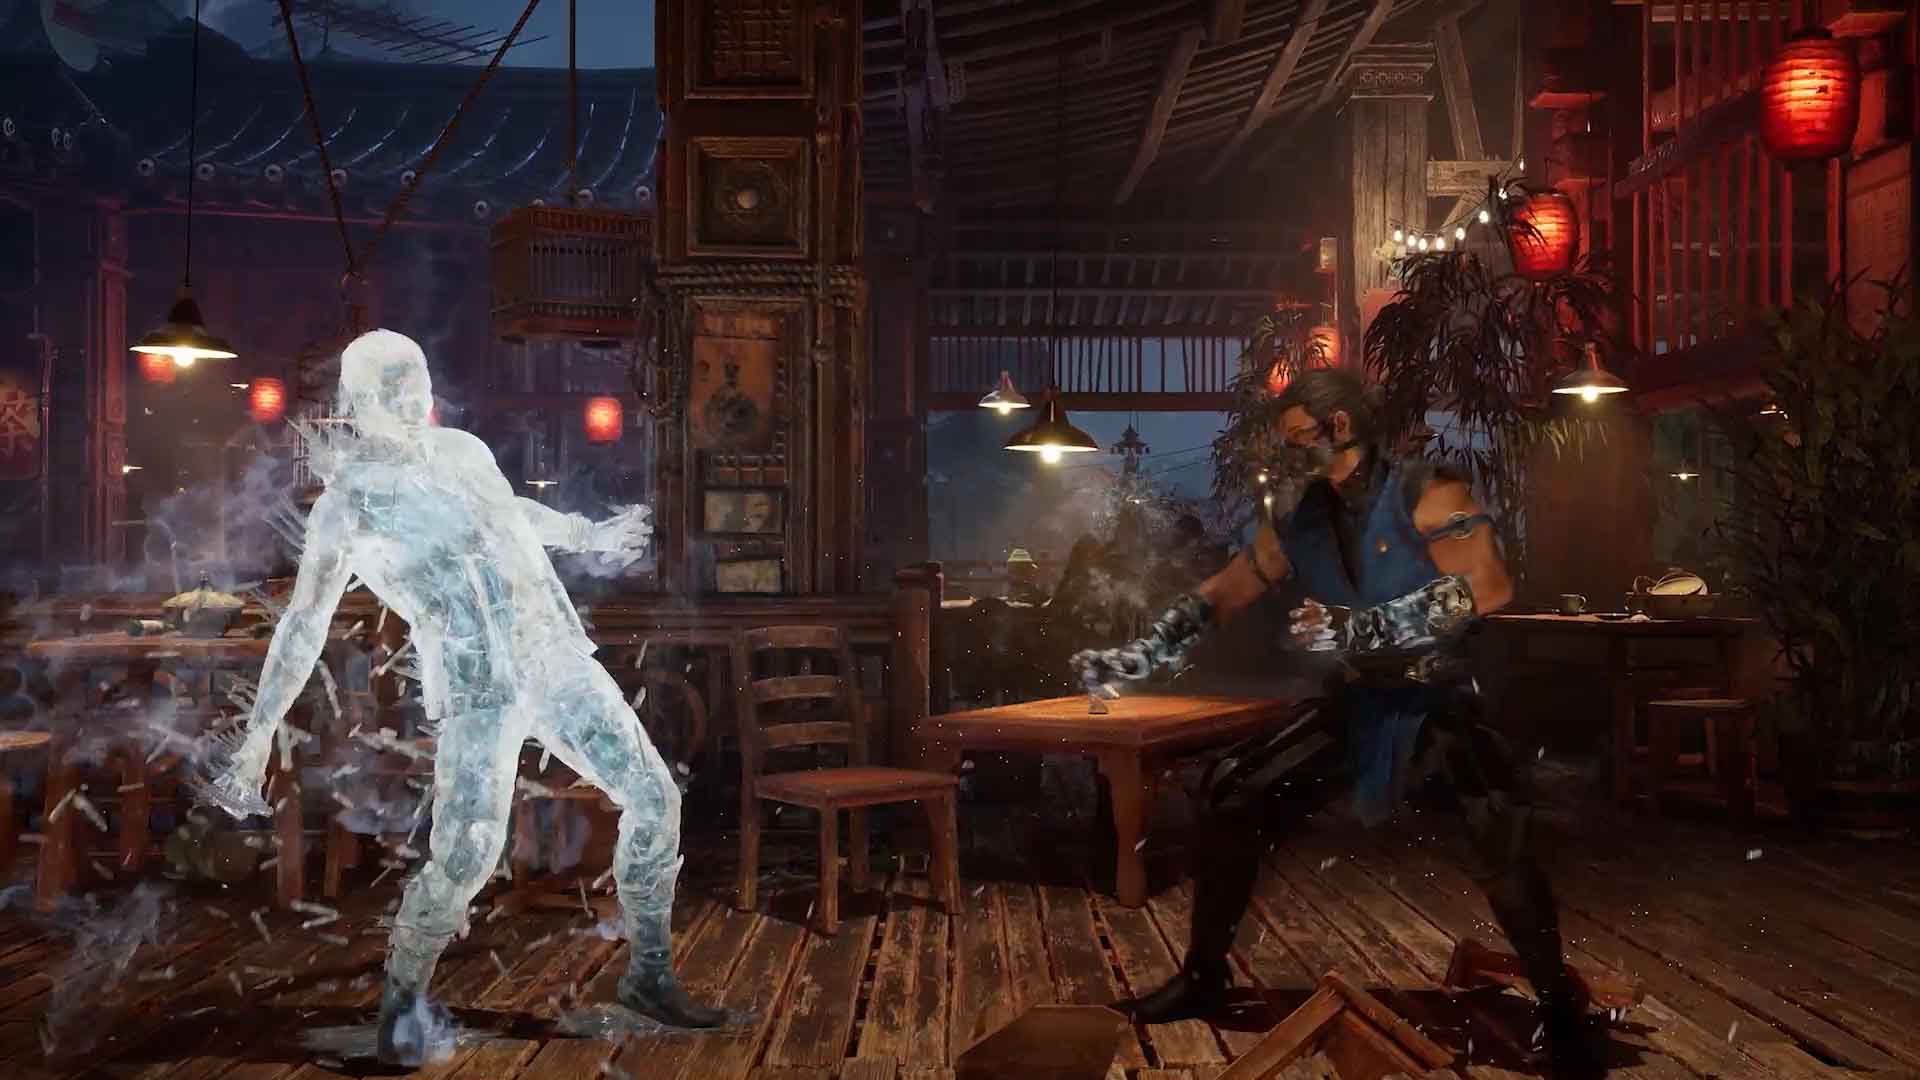 Watch Mortal Kombat 1's Brutal Gameplay For The First Time